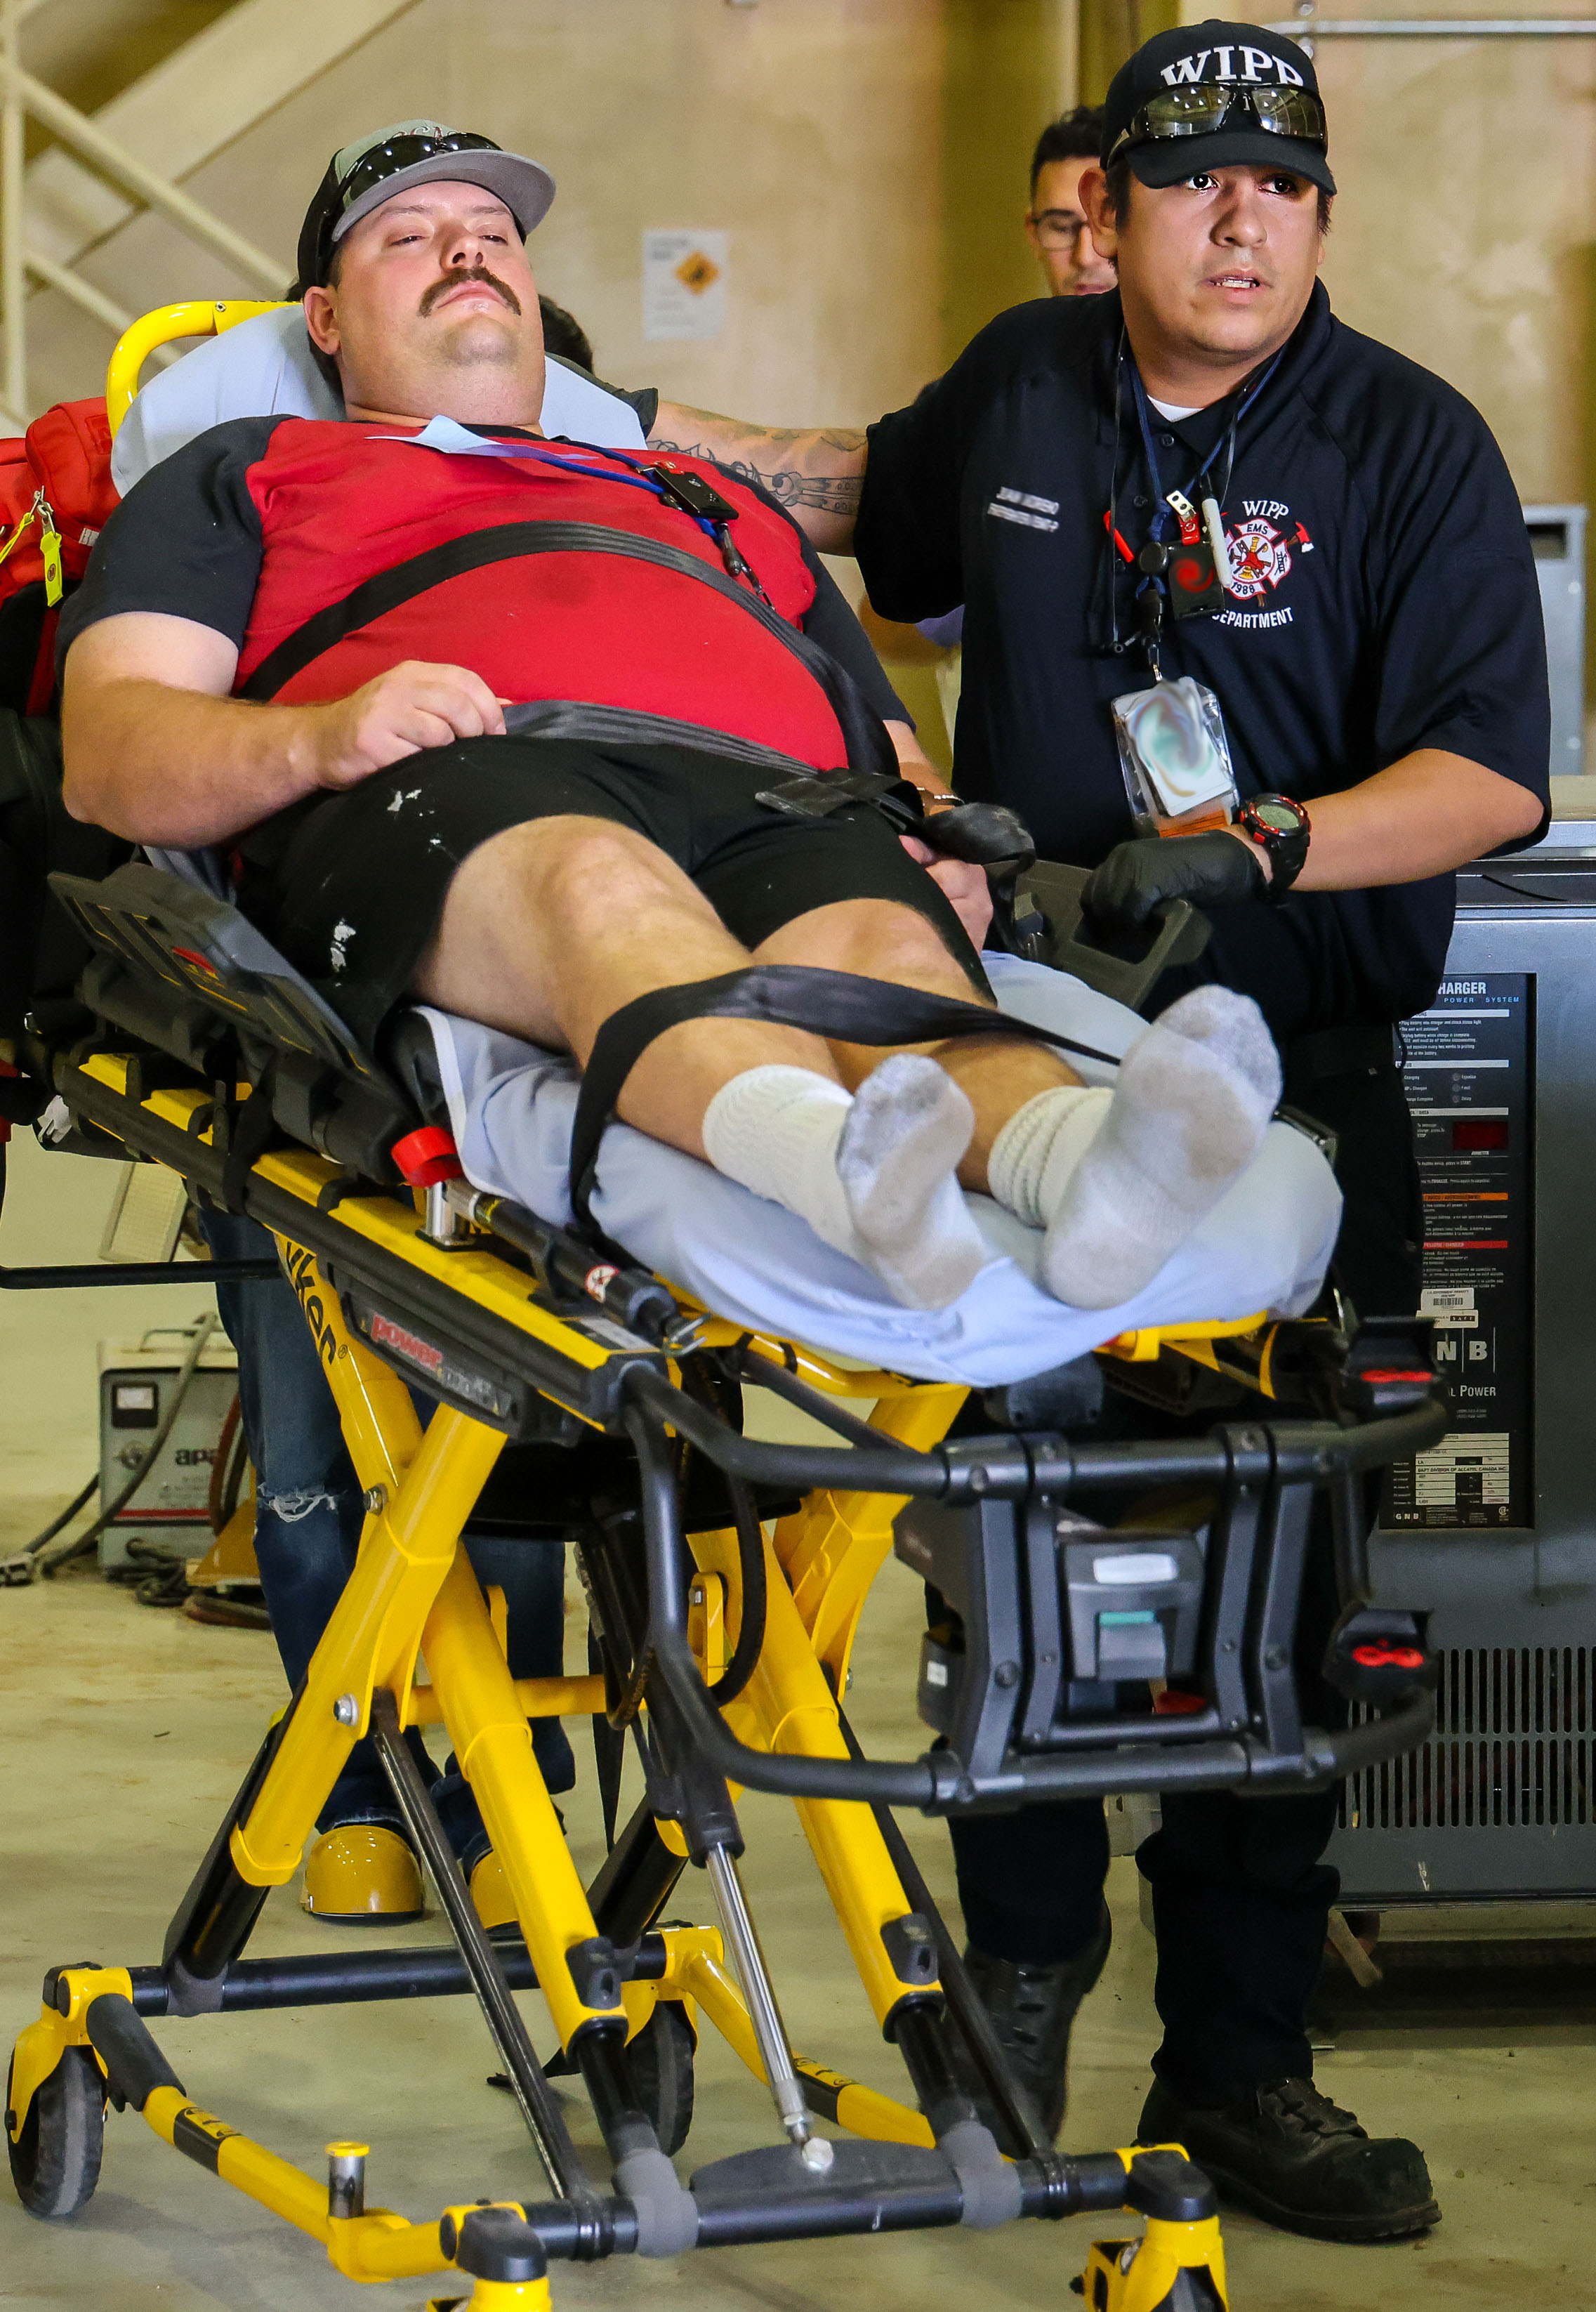 A firefighter/paramedic wheels away a victim during the exercise